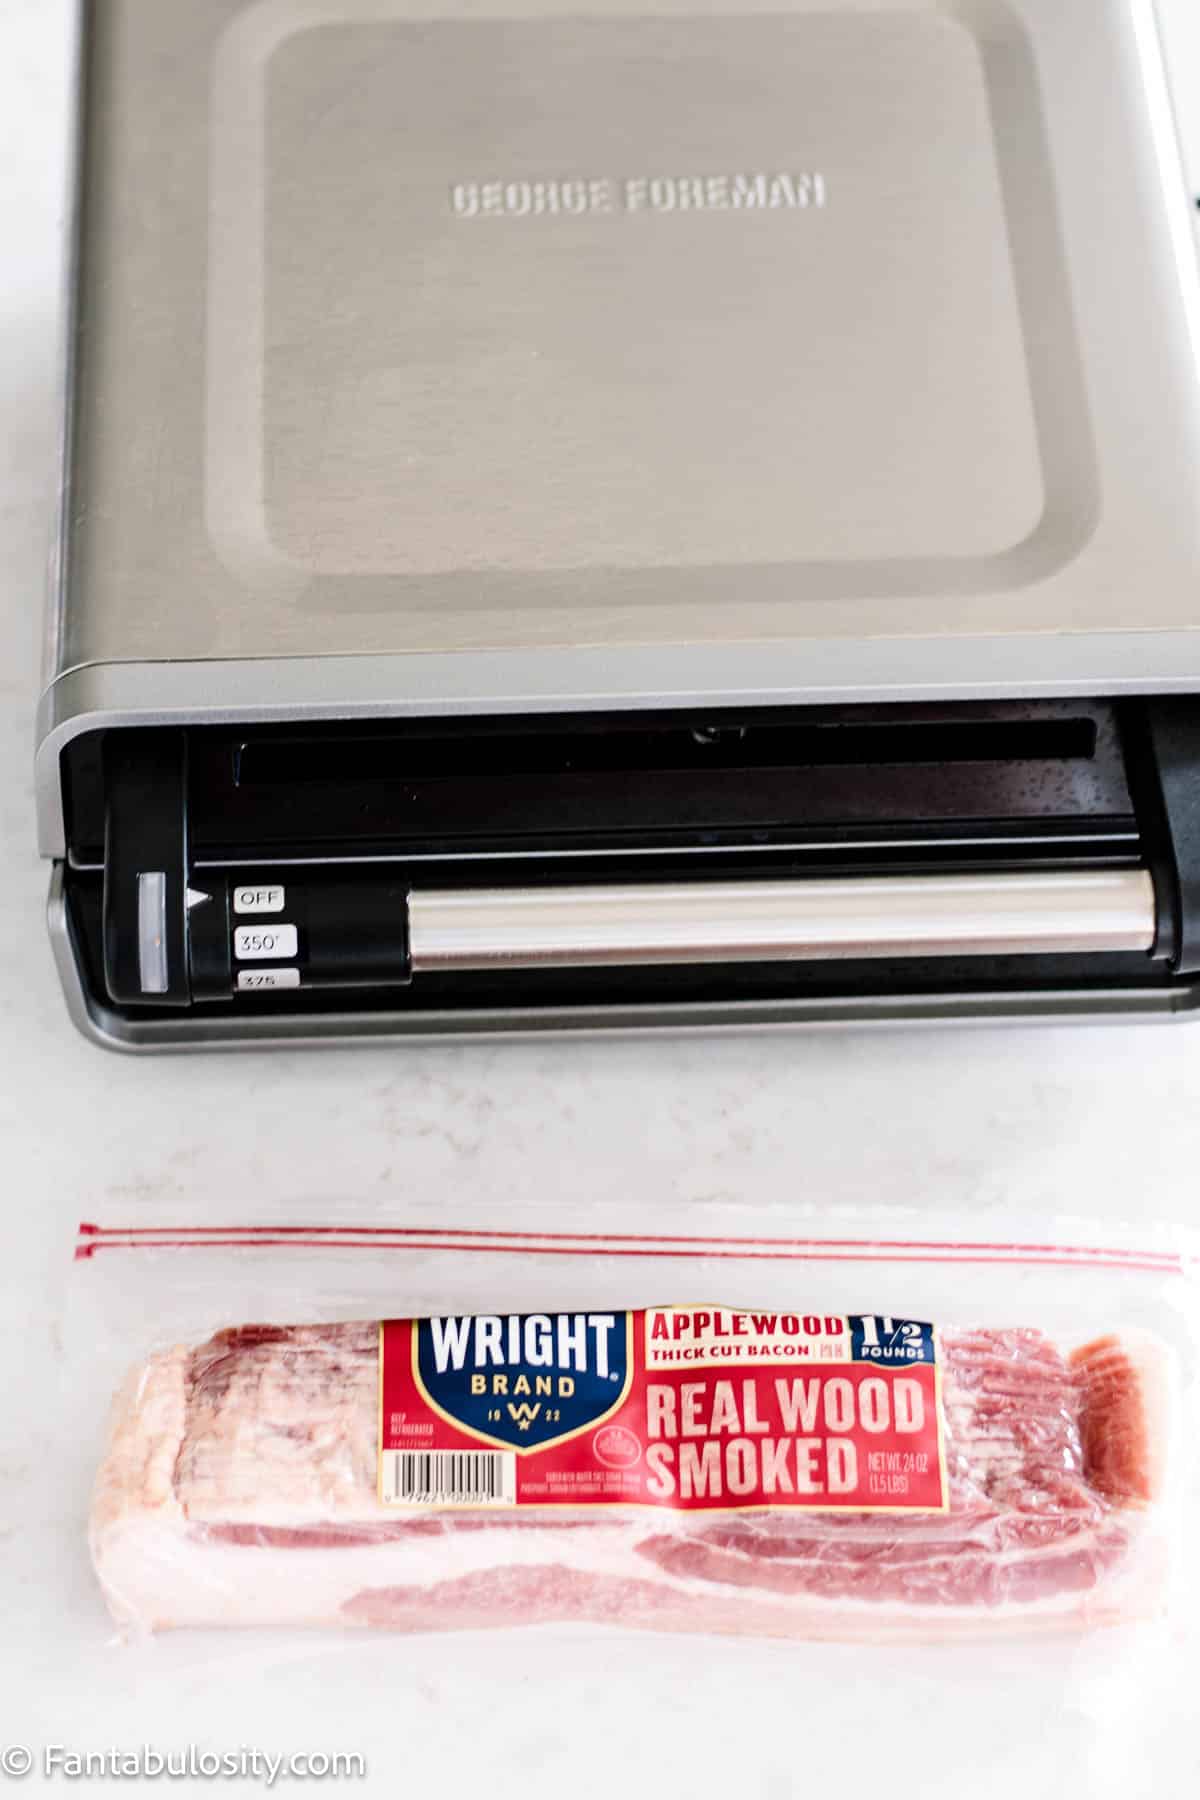 Package of bacon, sitting in front of George Foreman Grill